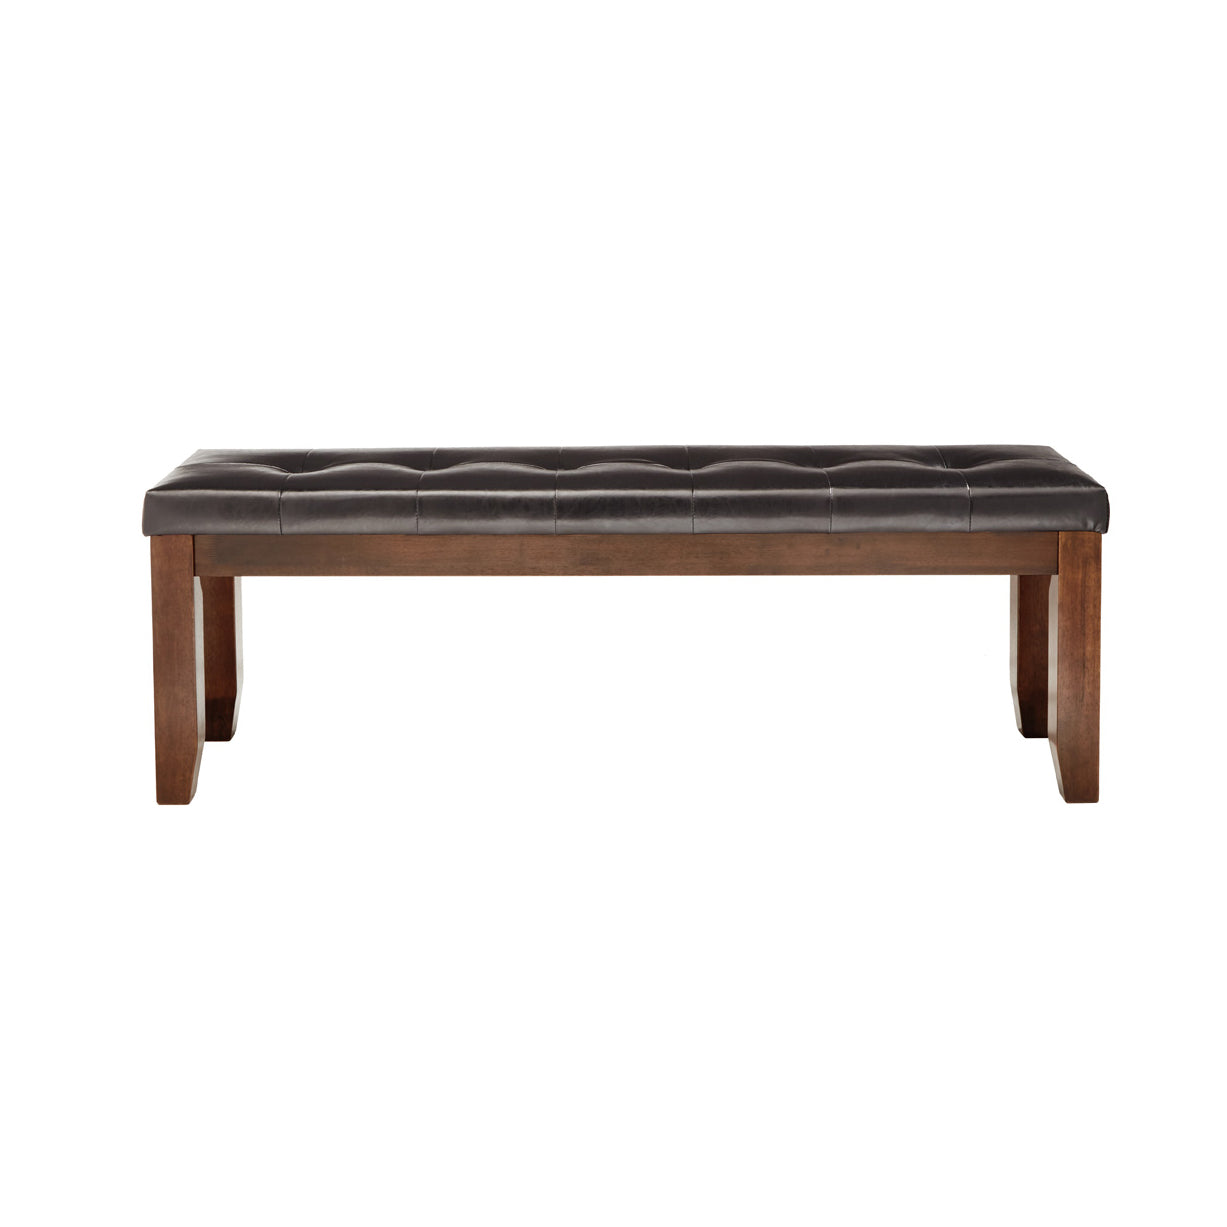 Homelegance Ameillia 60 inch Dining Bench in Dark Brown Leatherette